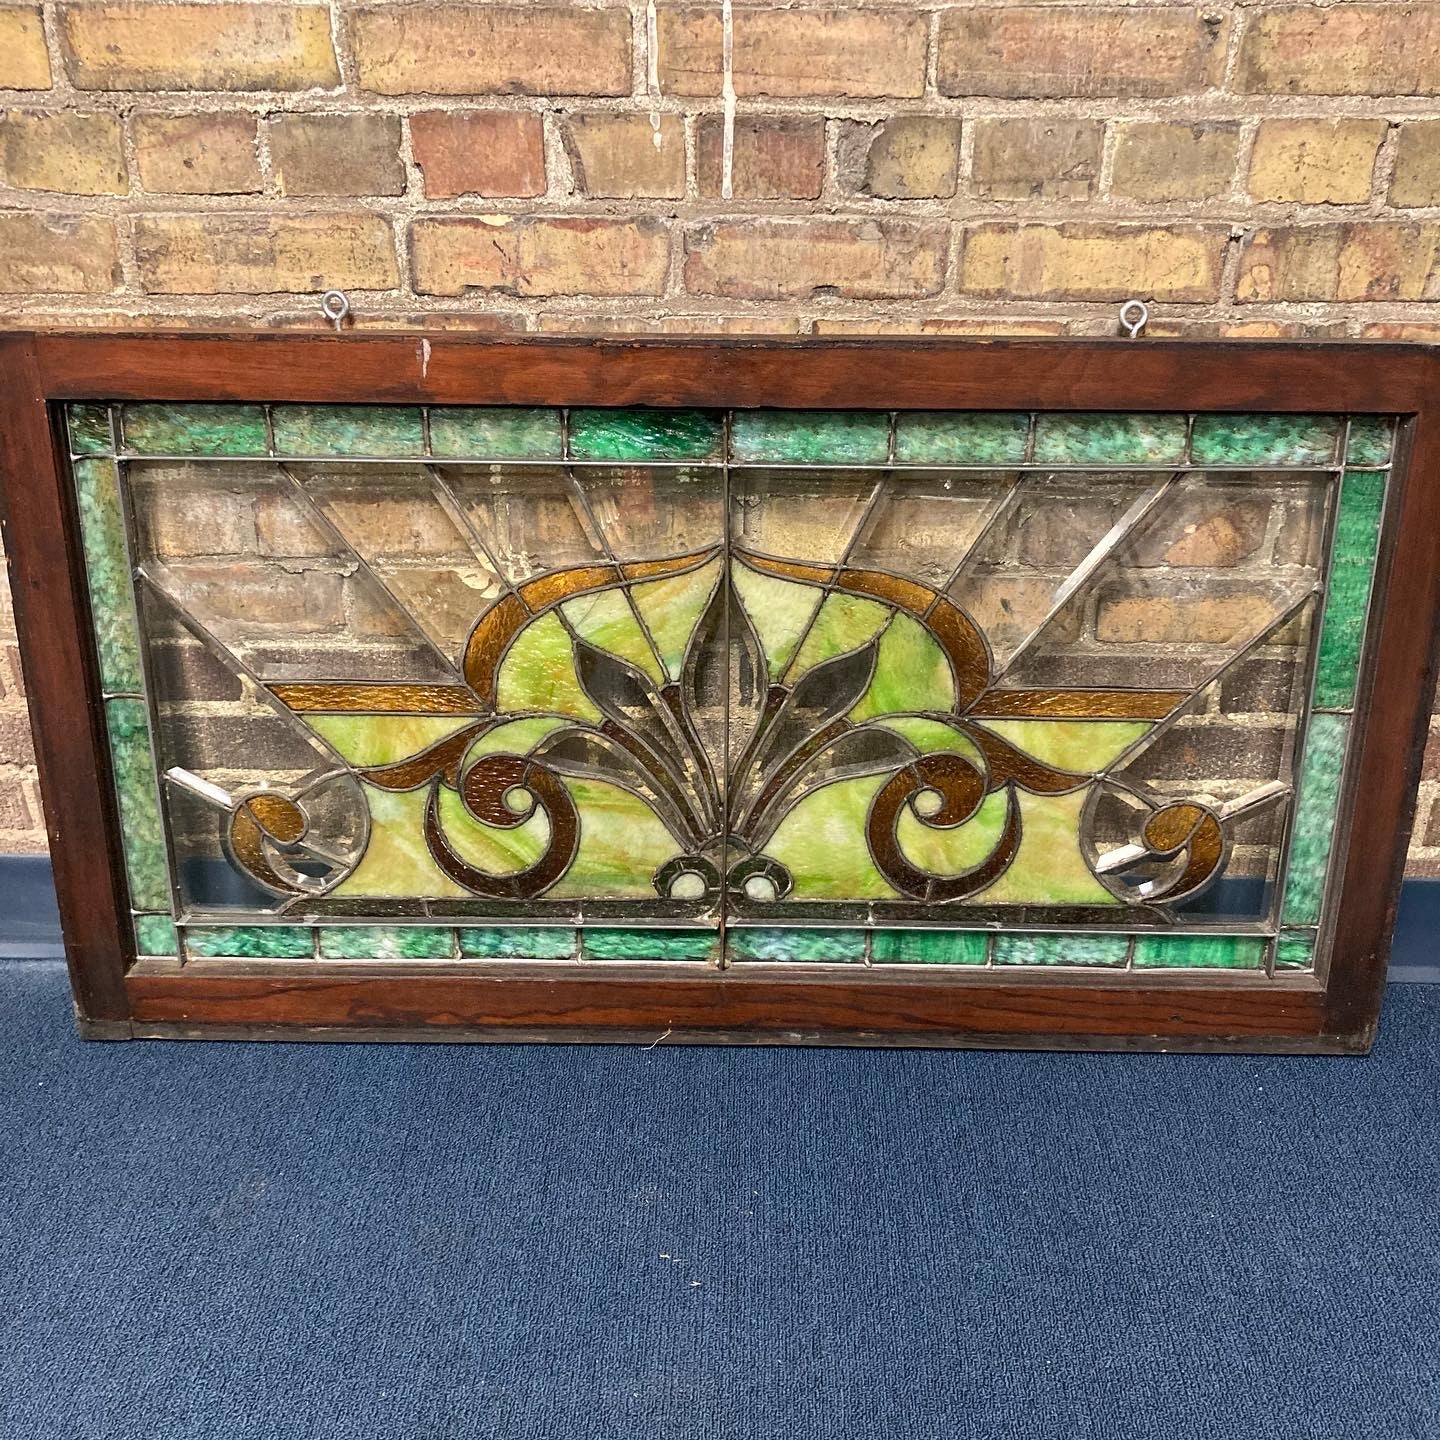 Antique Ornate Stained and Beveled Glass Window